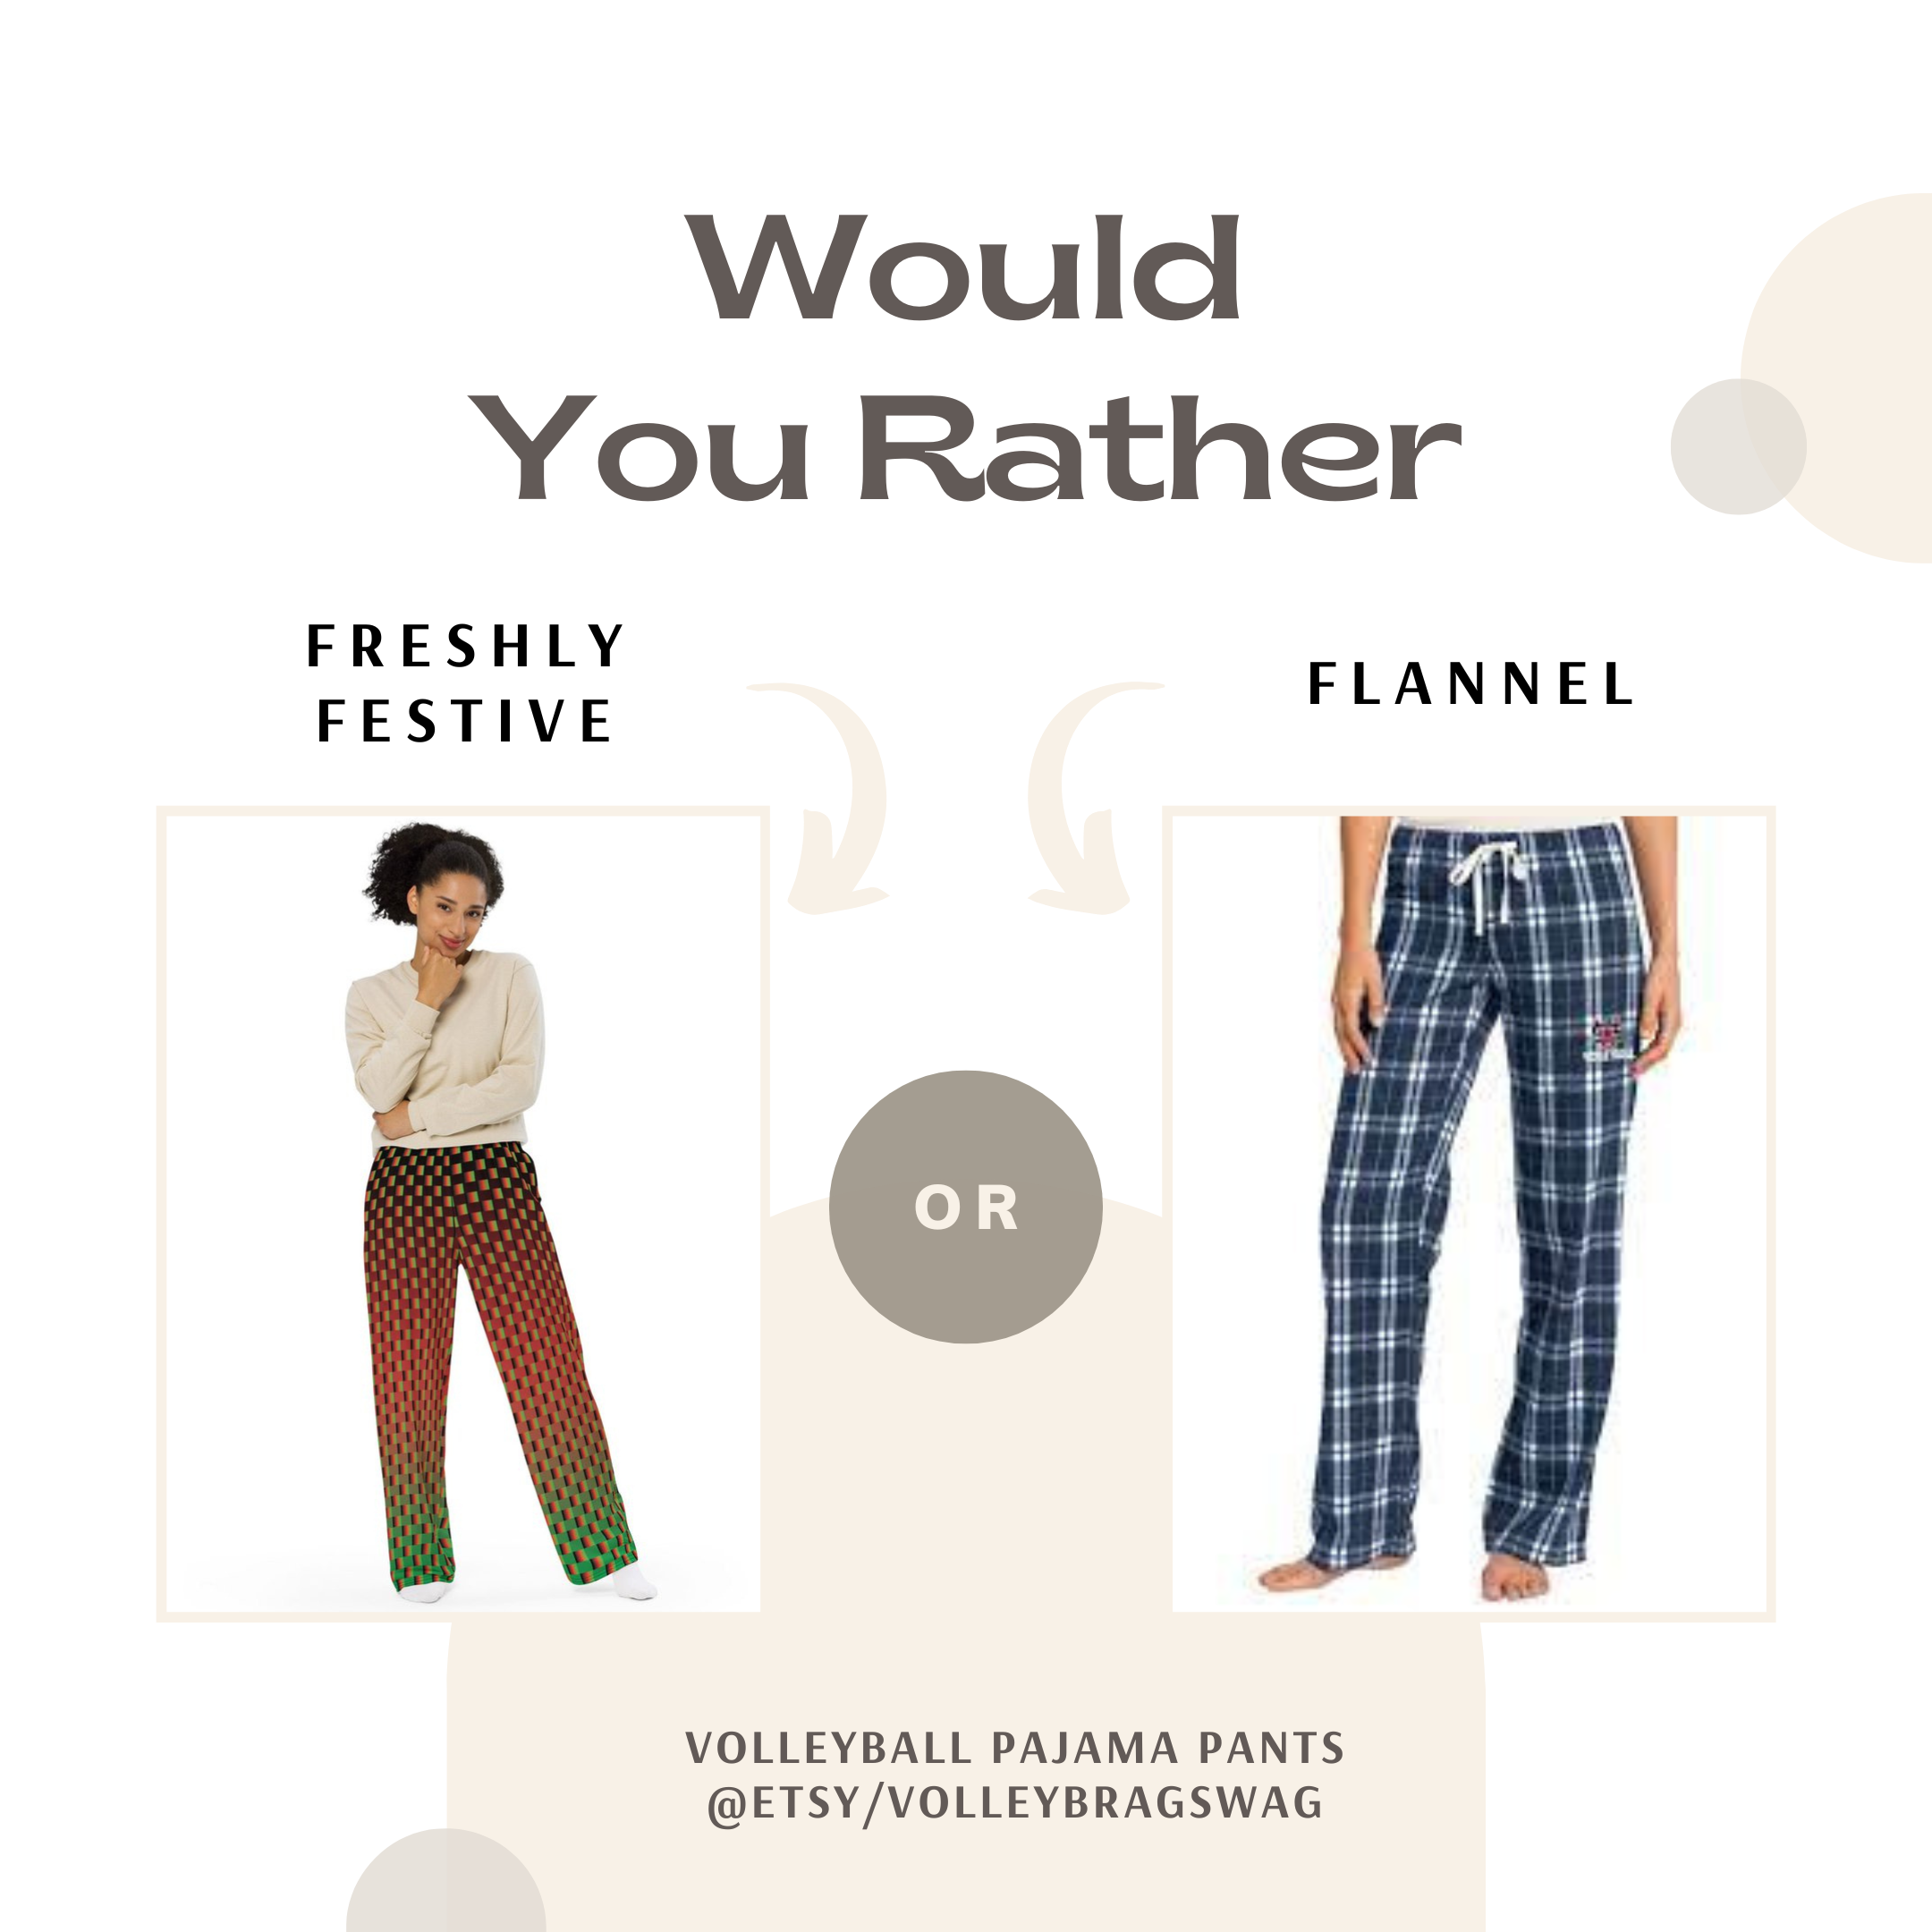 What do players wear for volleyball? Flannel volleyball pants are out and Volleybragswag Beach Volleyball Pants are in! Unimaginative, two-color plaid patterns are old-school because today's players need attire to match their energy, passion and enthusiasm for the game.